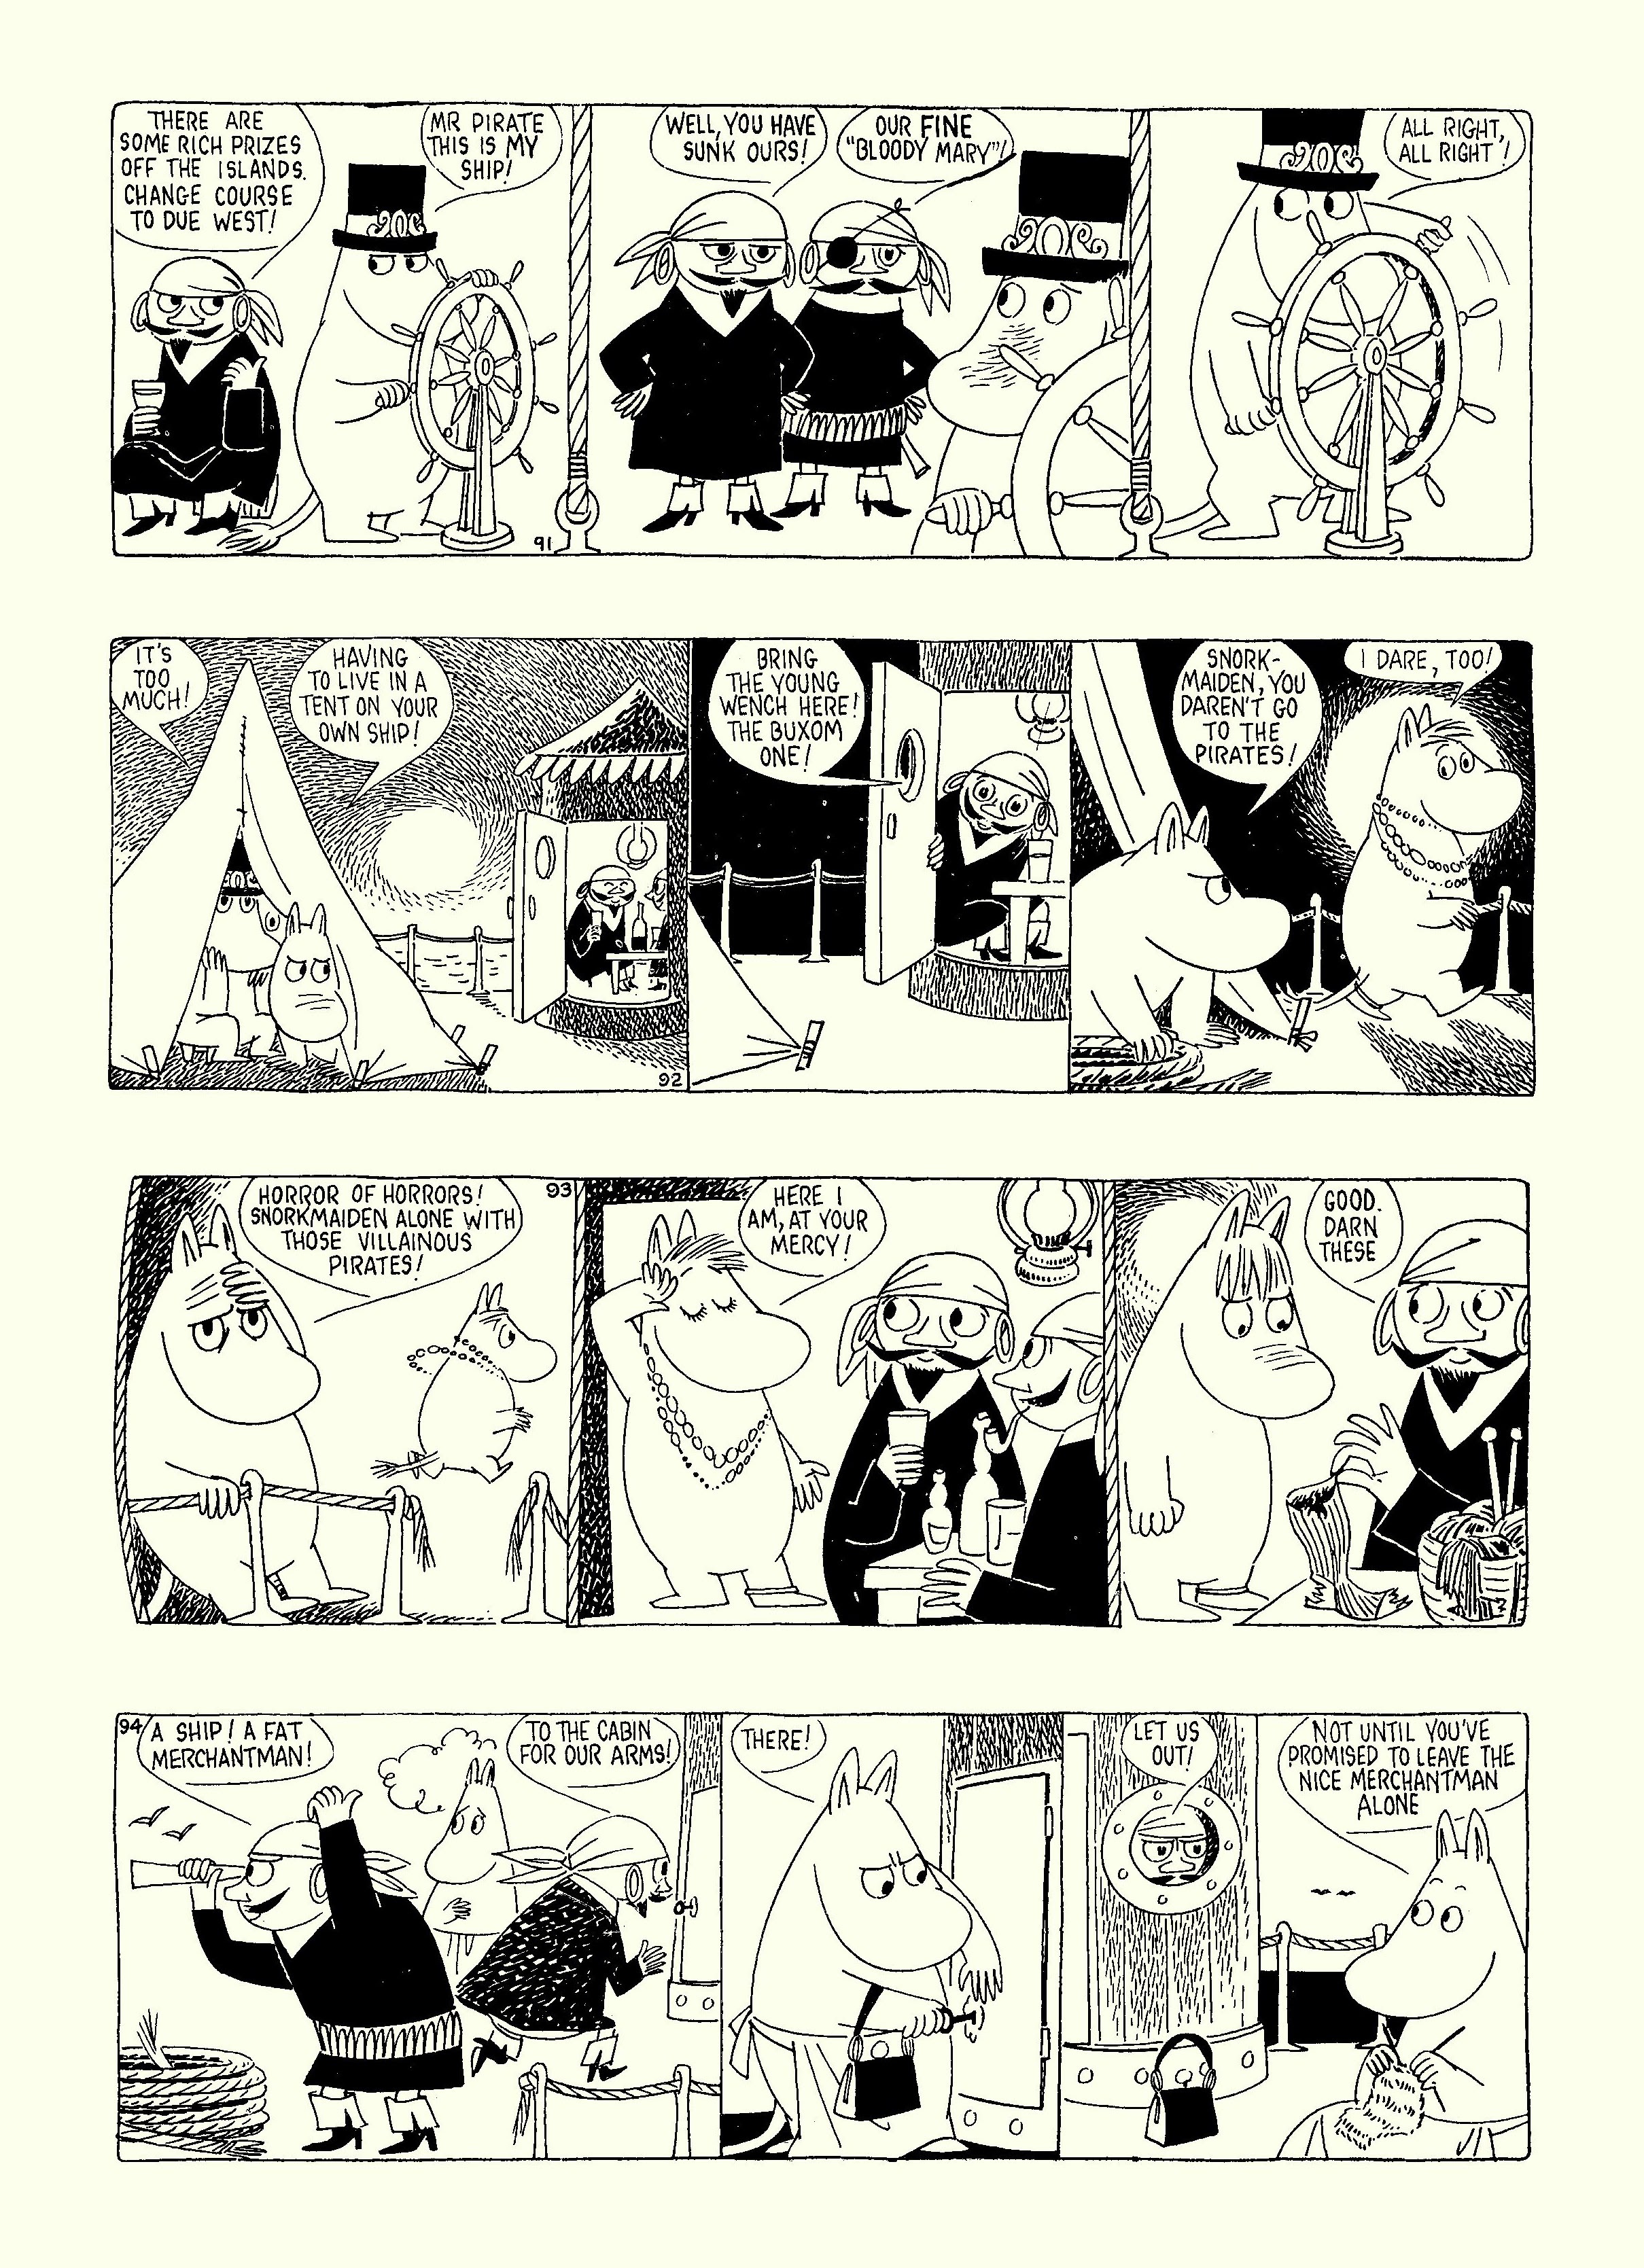 Read online Moomin: The Complete Tove Jansson Comic Strip comic -  Issue # TPB 5 - 54